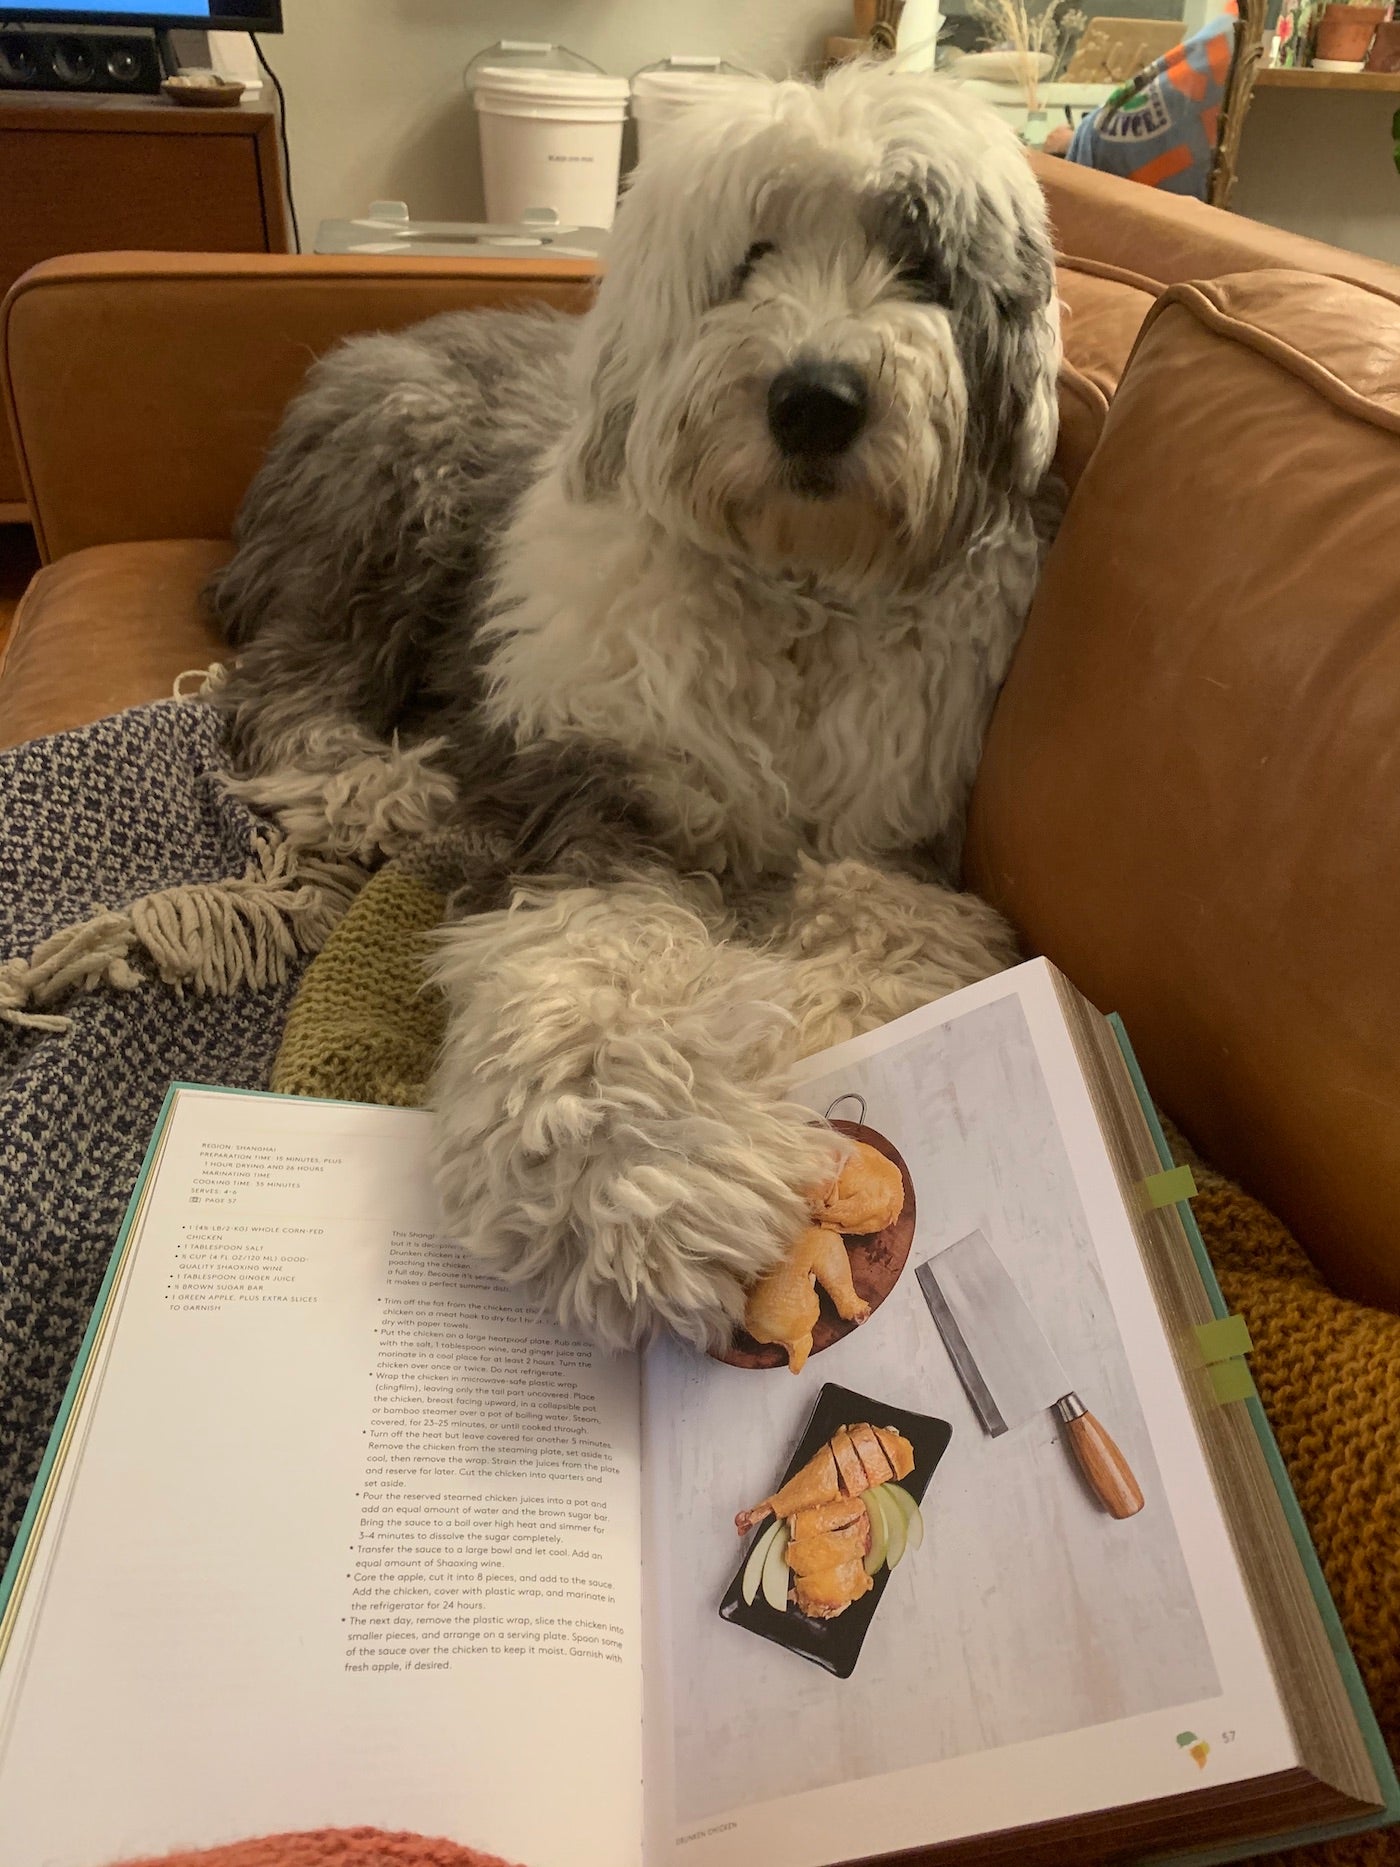 Sheepdog with book